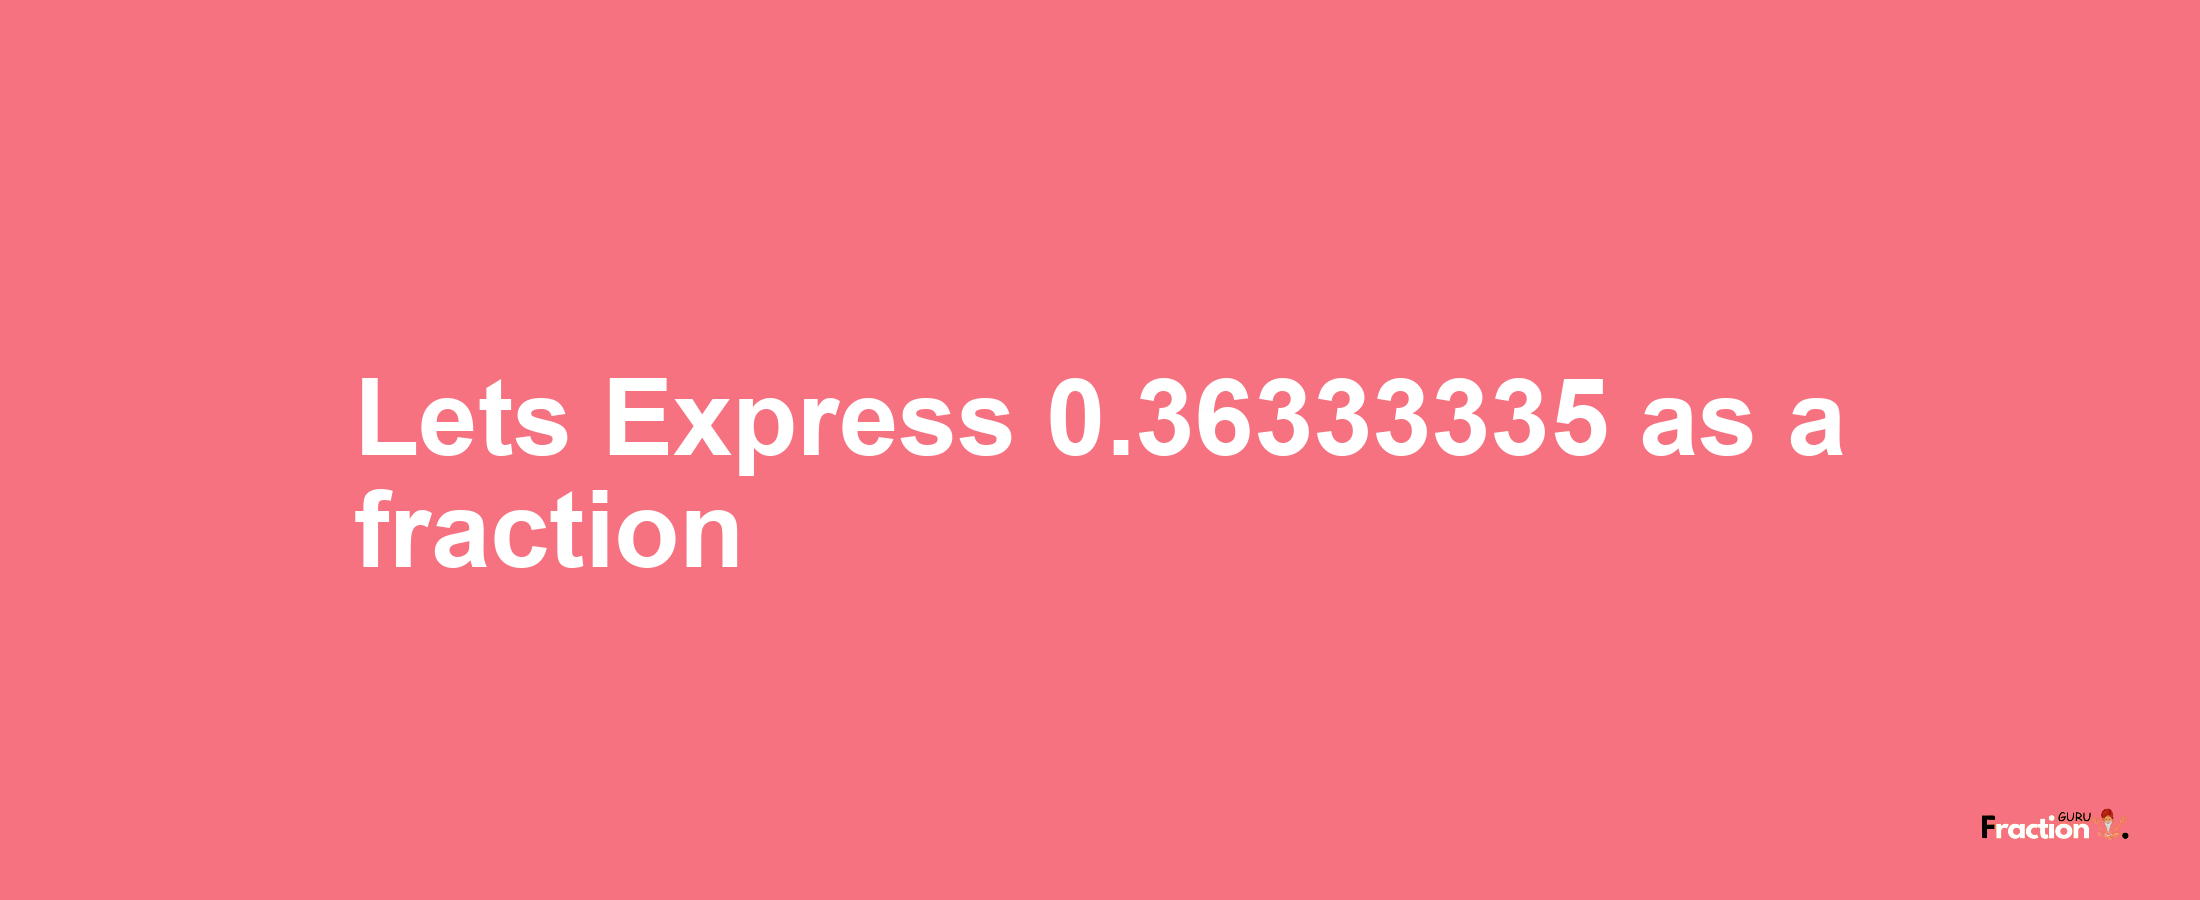 Lets Express 0.36333335 as afraction